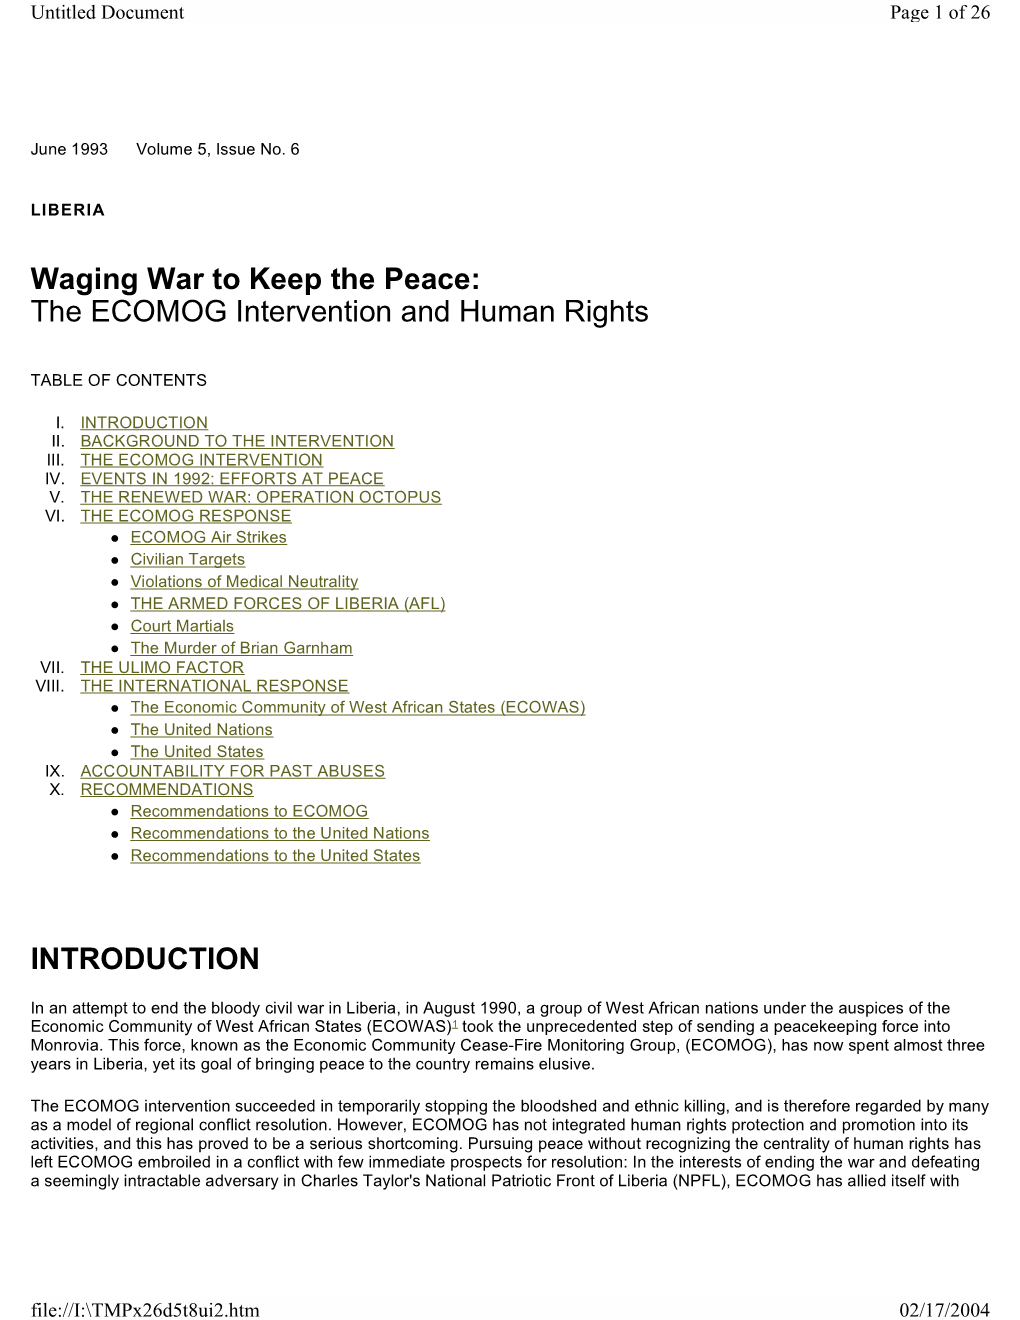 The ECOMOG Intervention and Human Rights INTRODUCTION